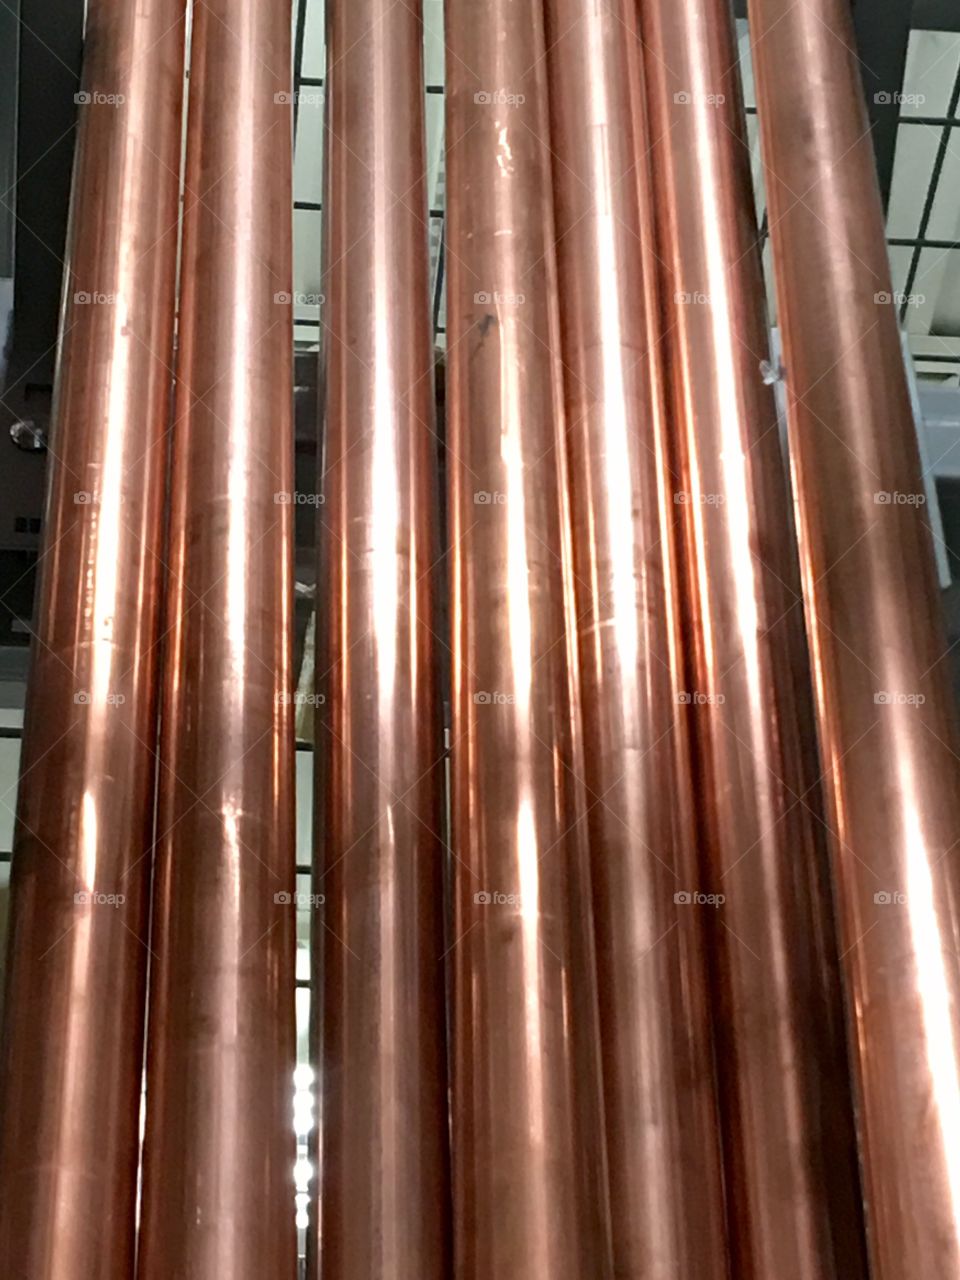 Copper pipes upright in store for purchase!